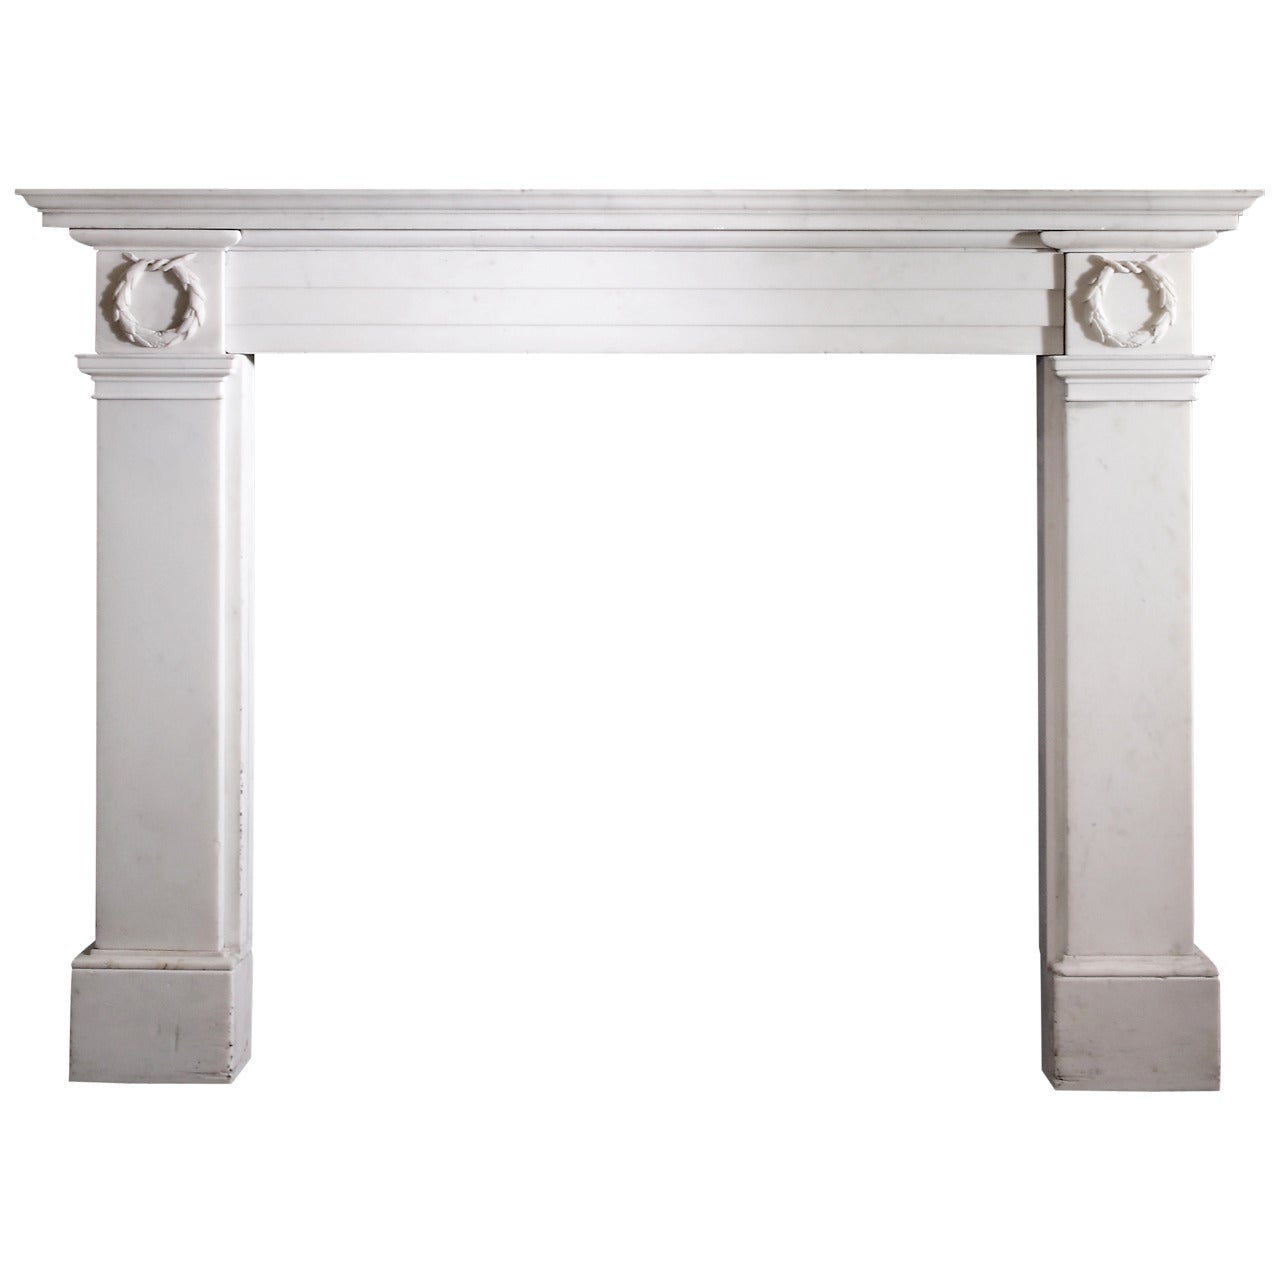 Early 19th Century Regency Mantle in Statuary Marble